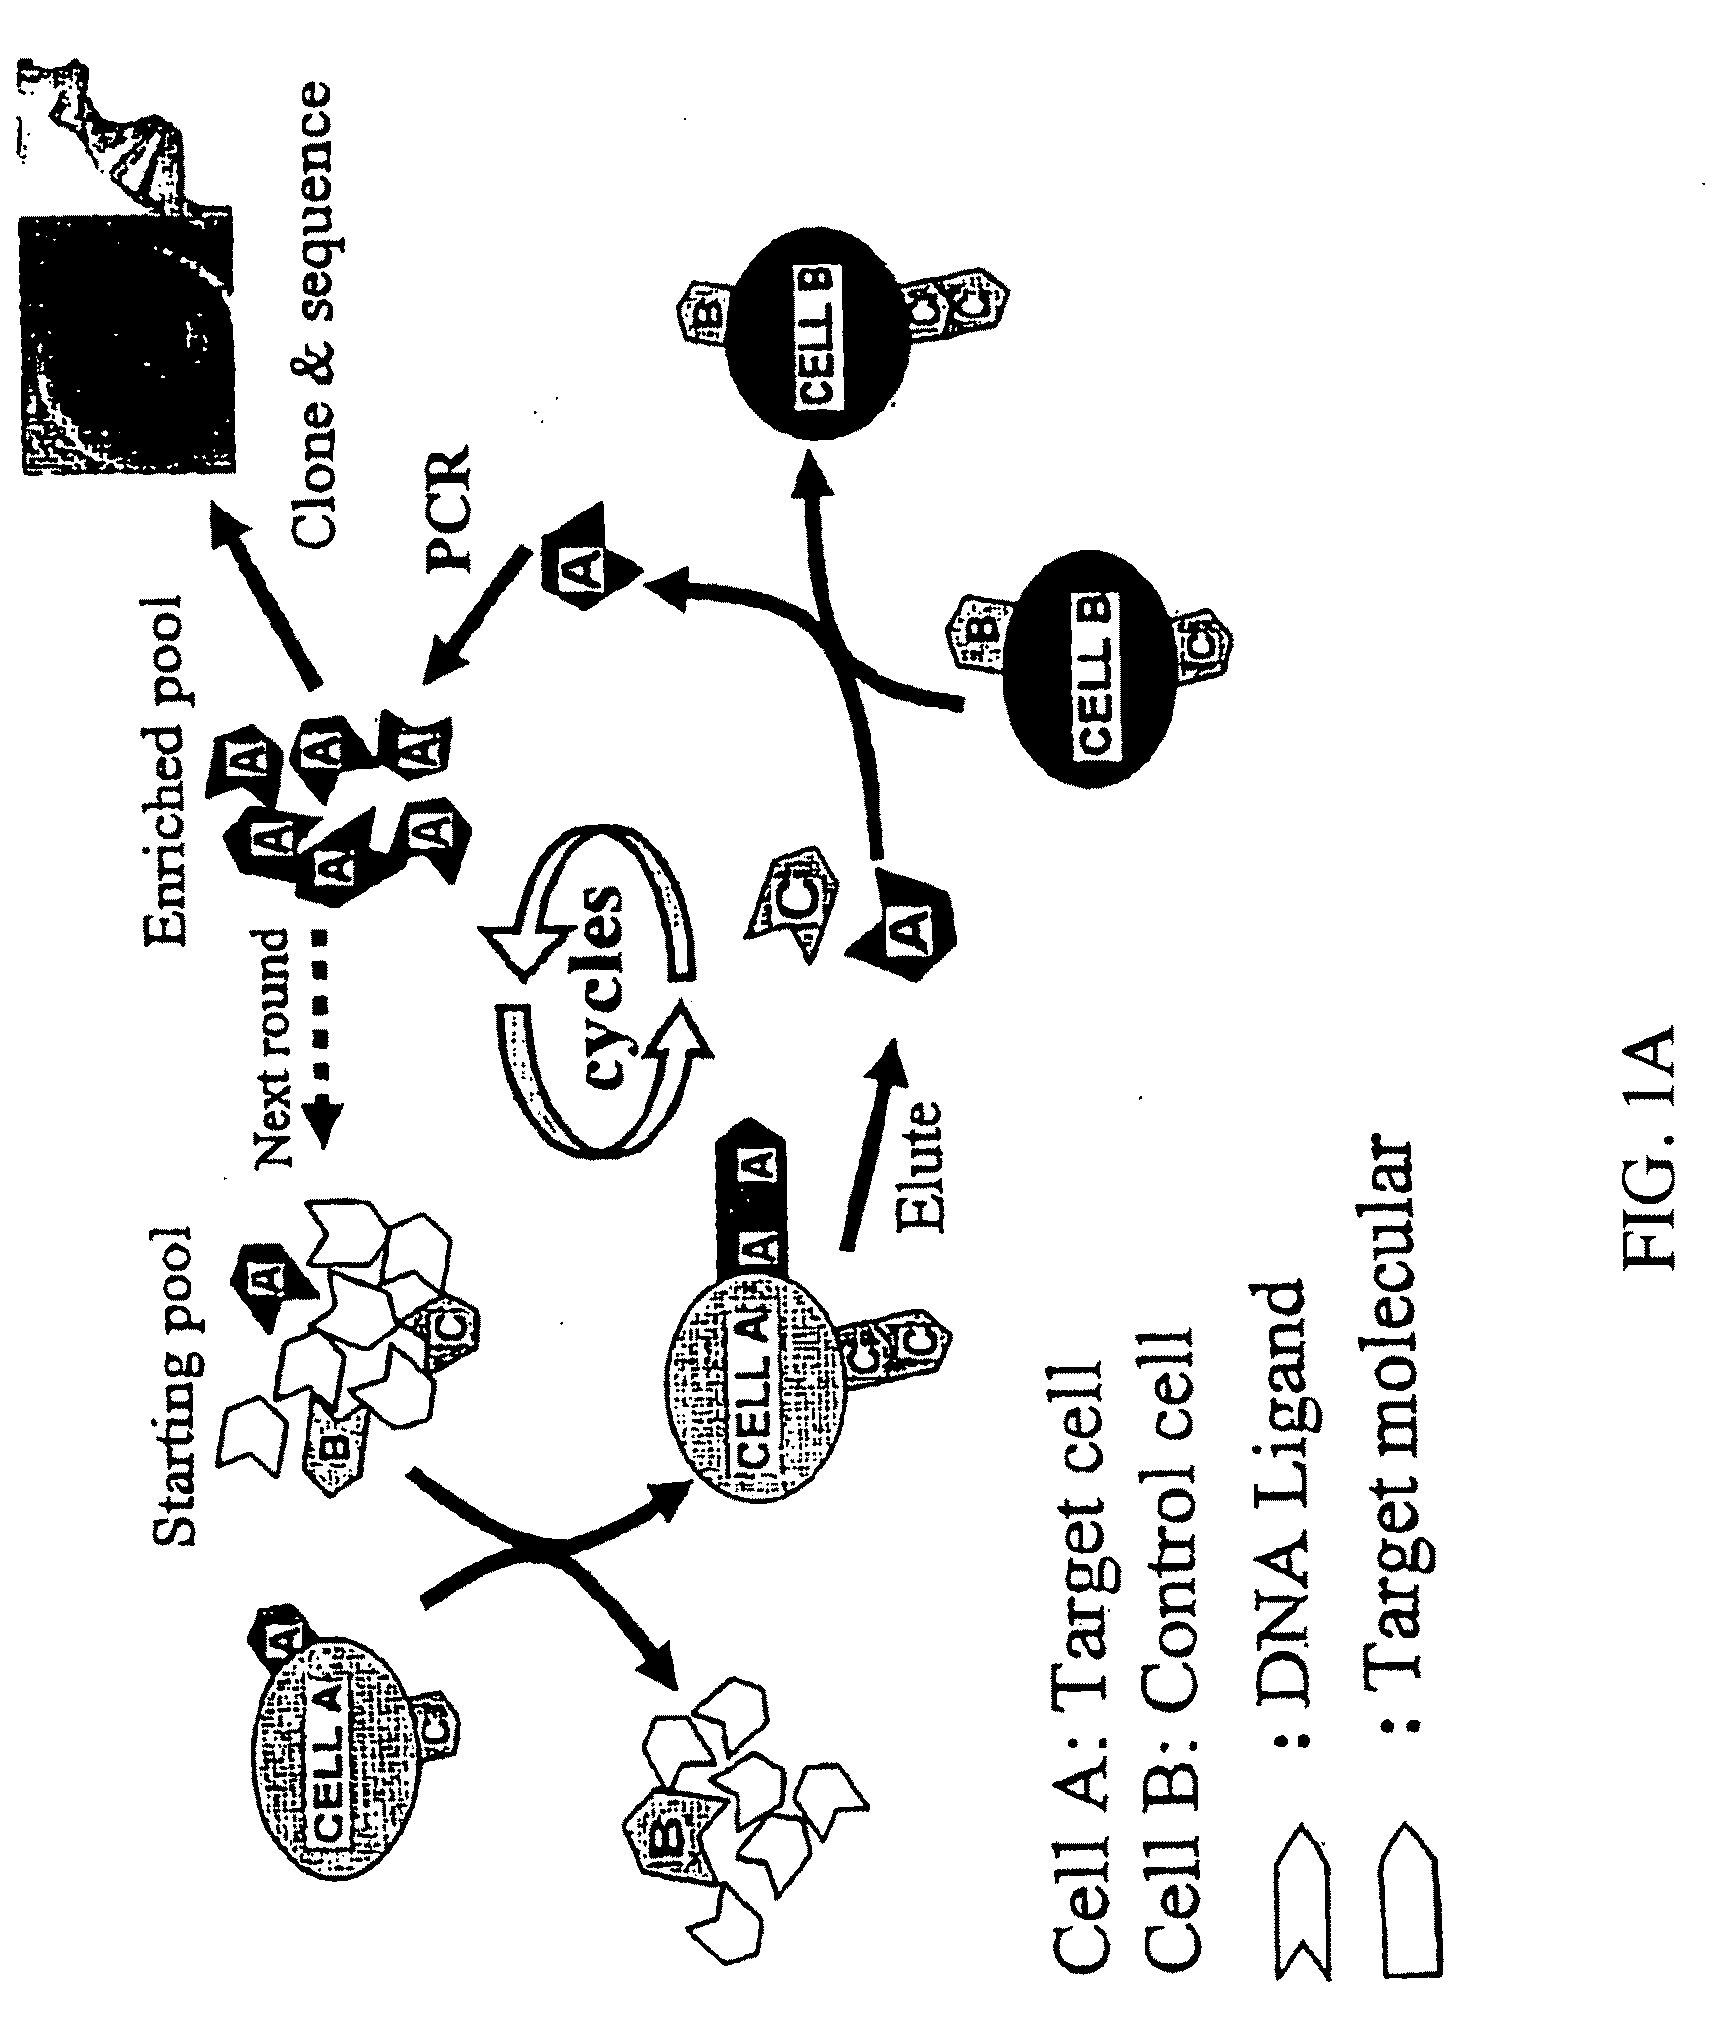 Methods for the production of highly sensitive and specific cell surface probes